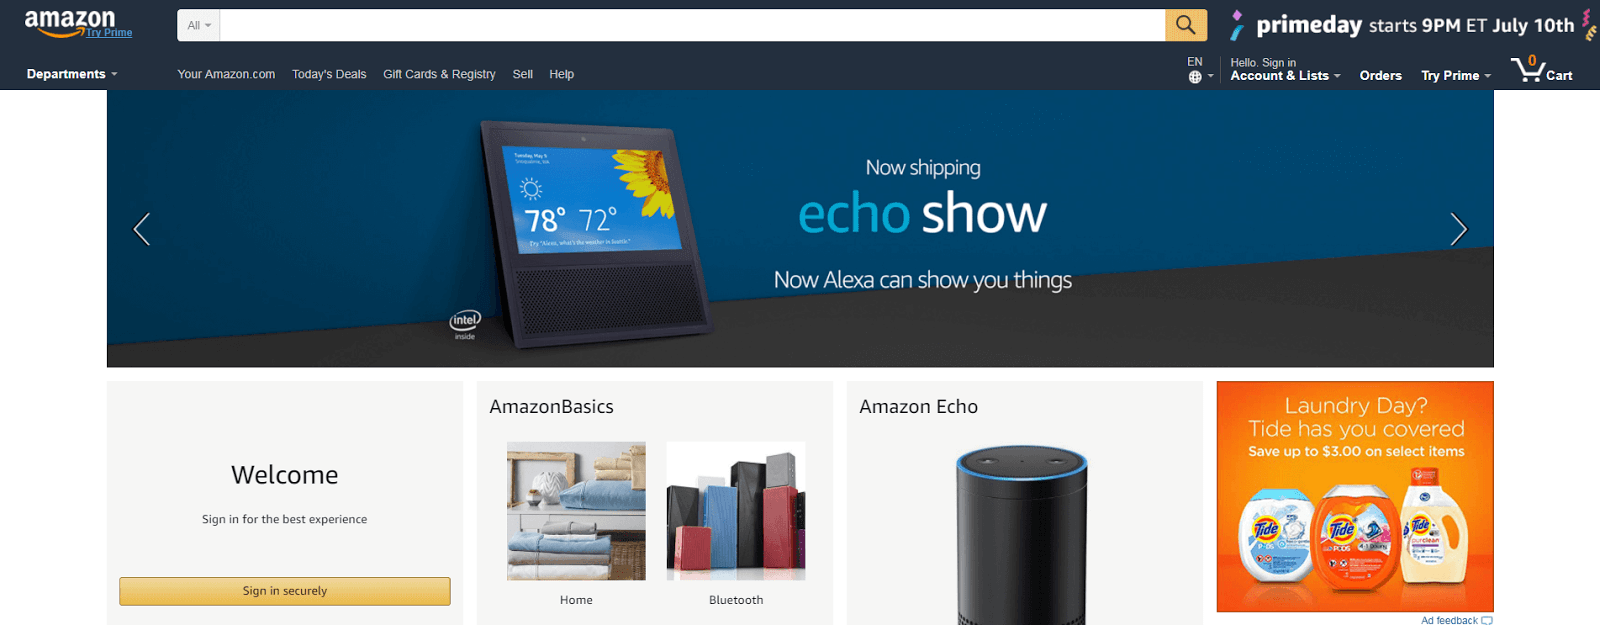 amazon-home-page.PNG